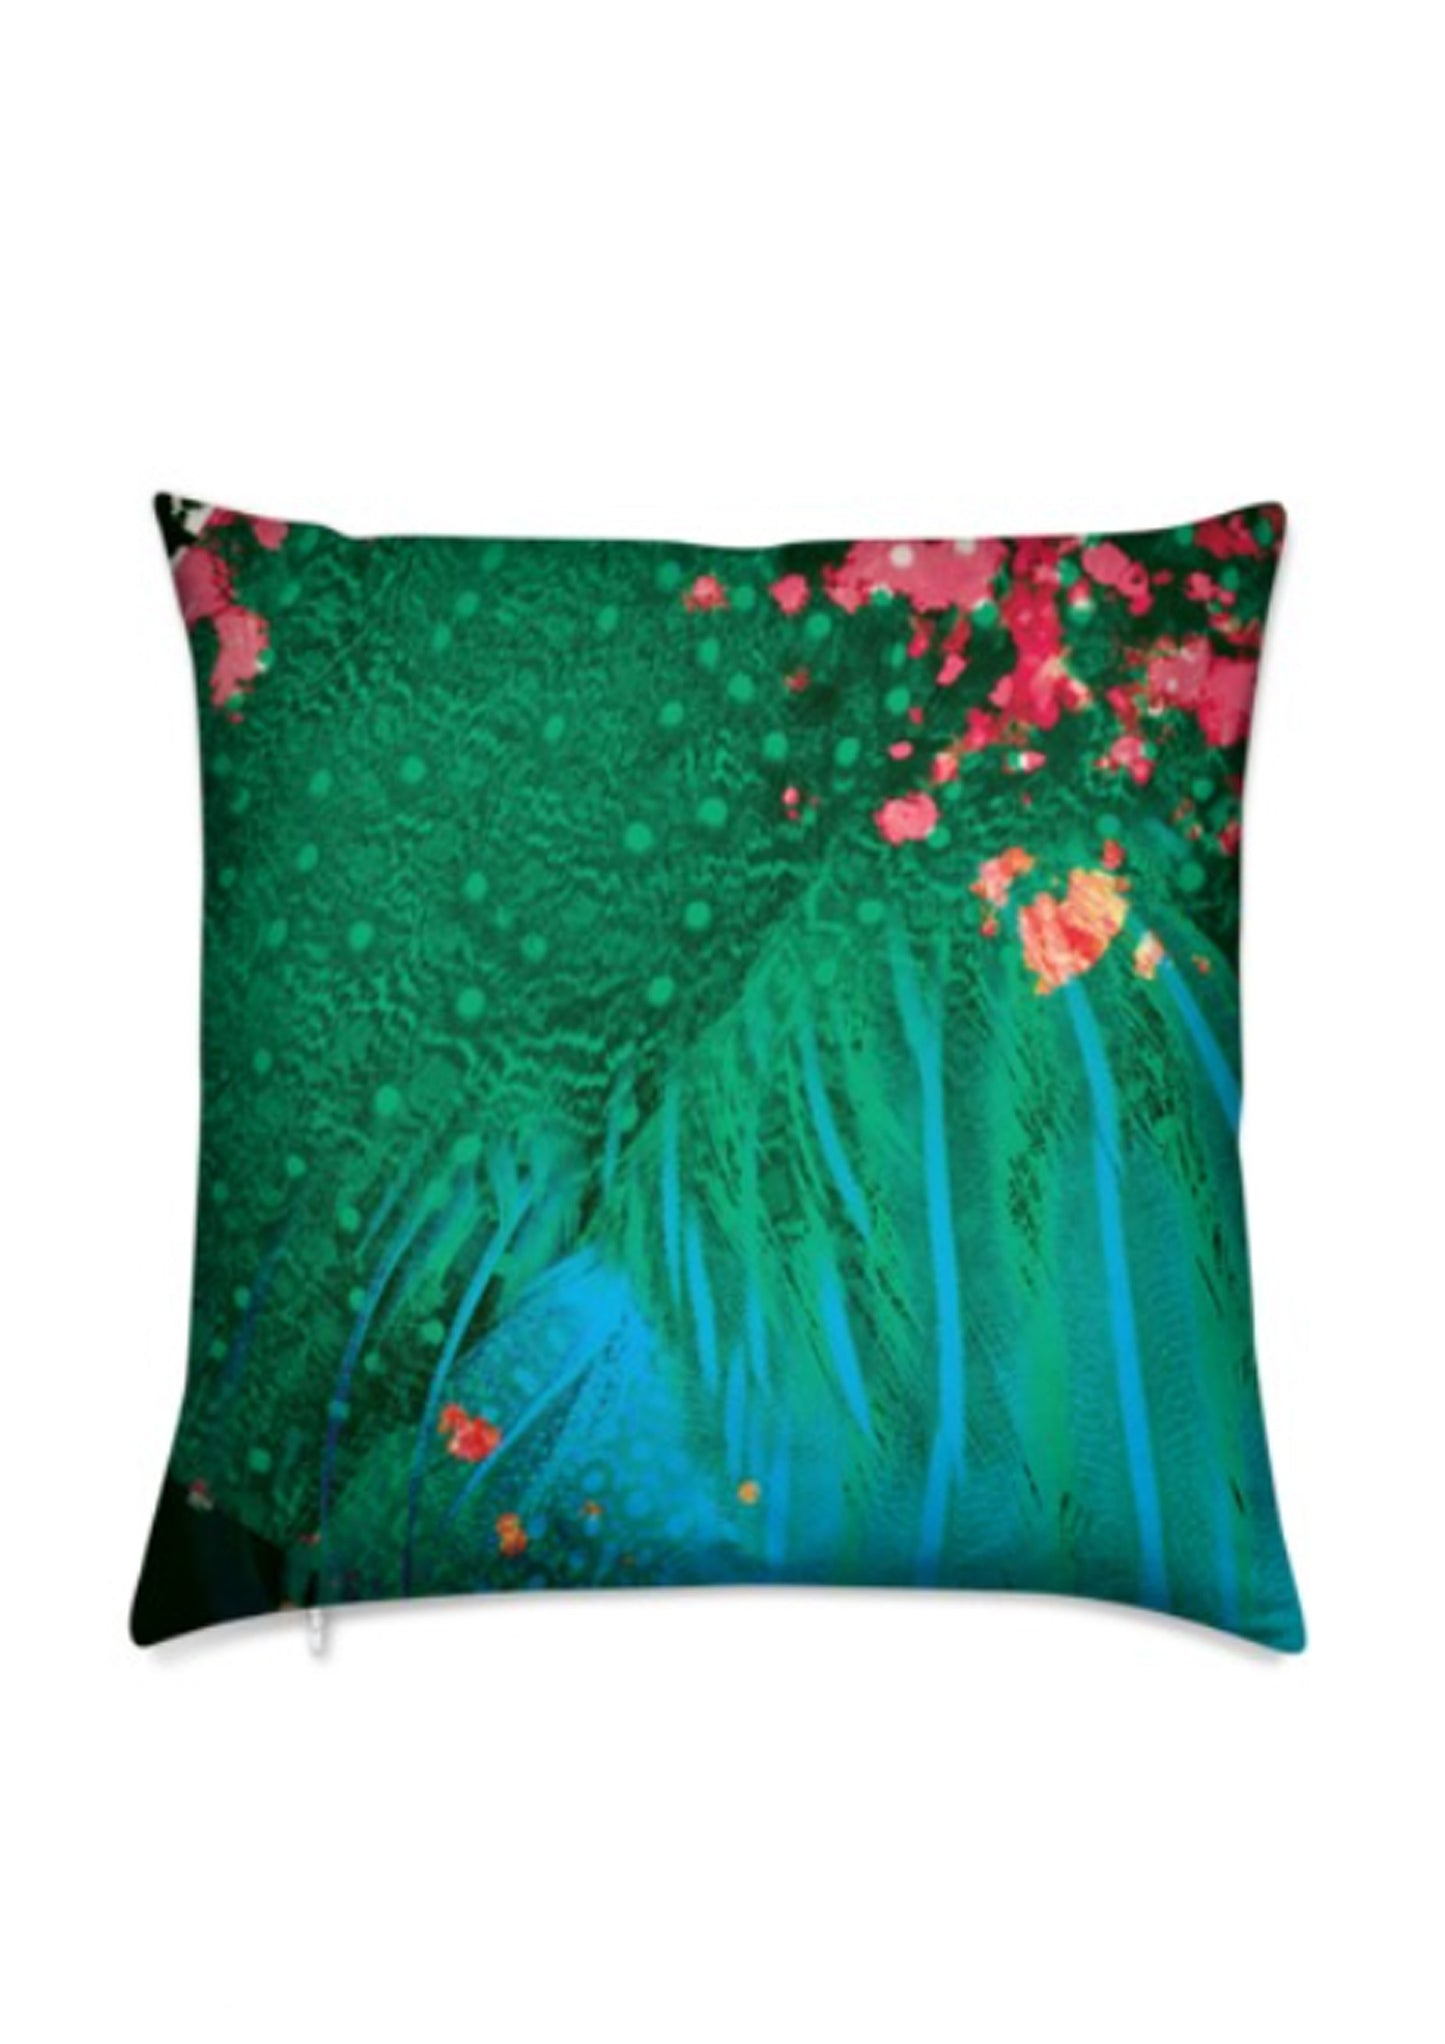 Green and pink feather velvet cushion